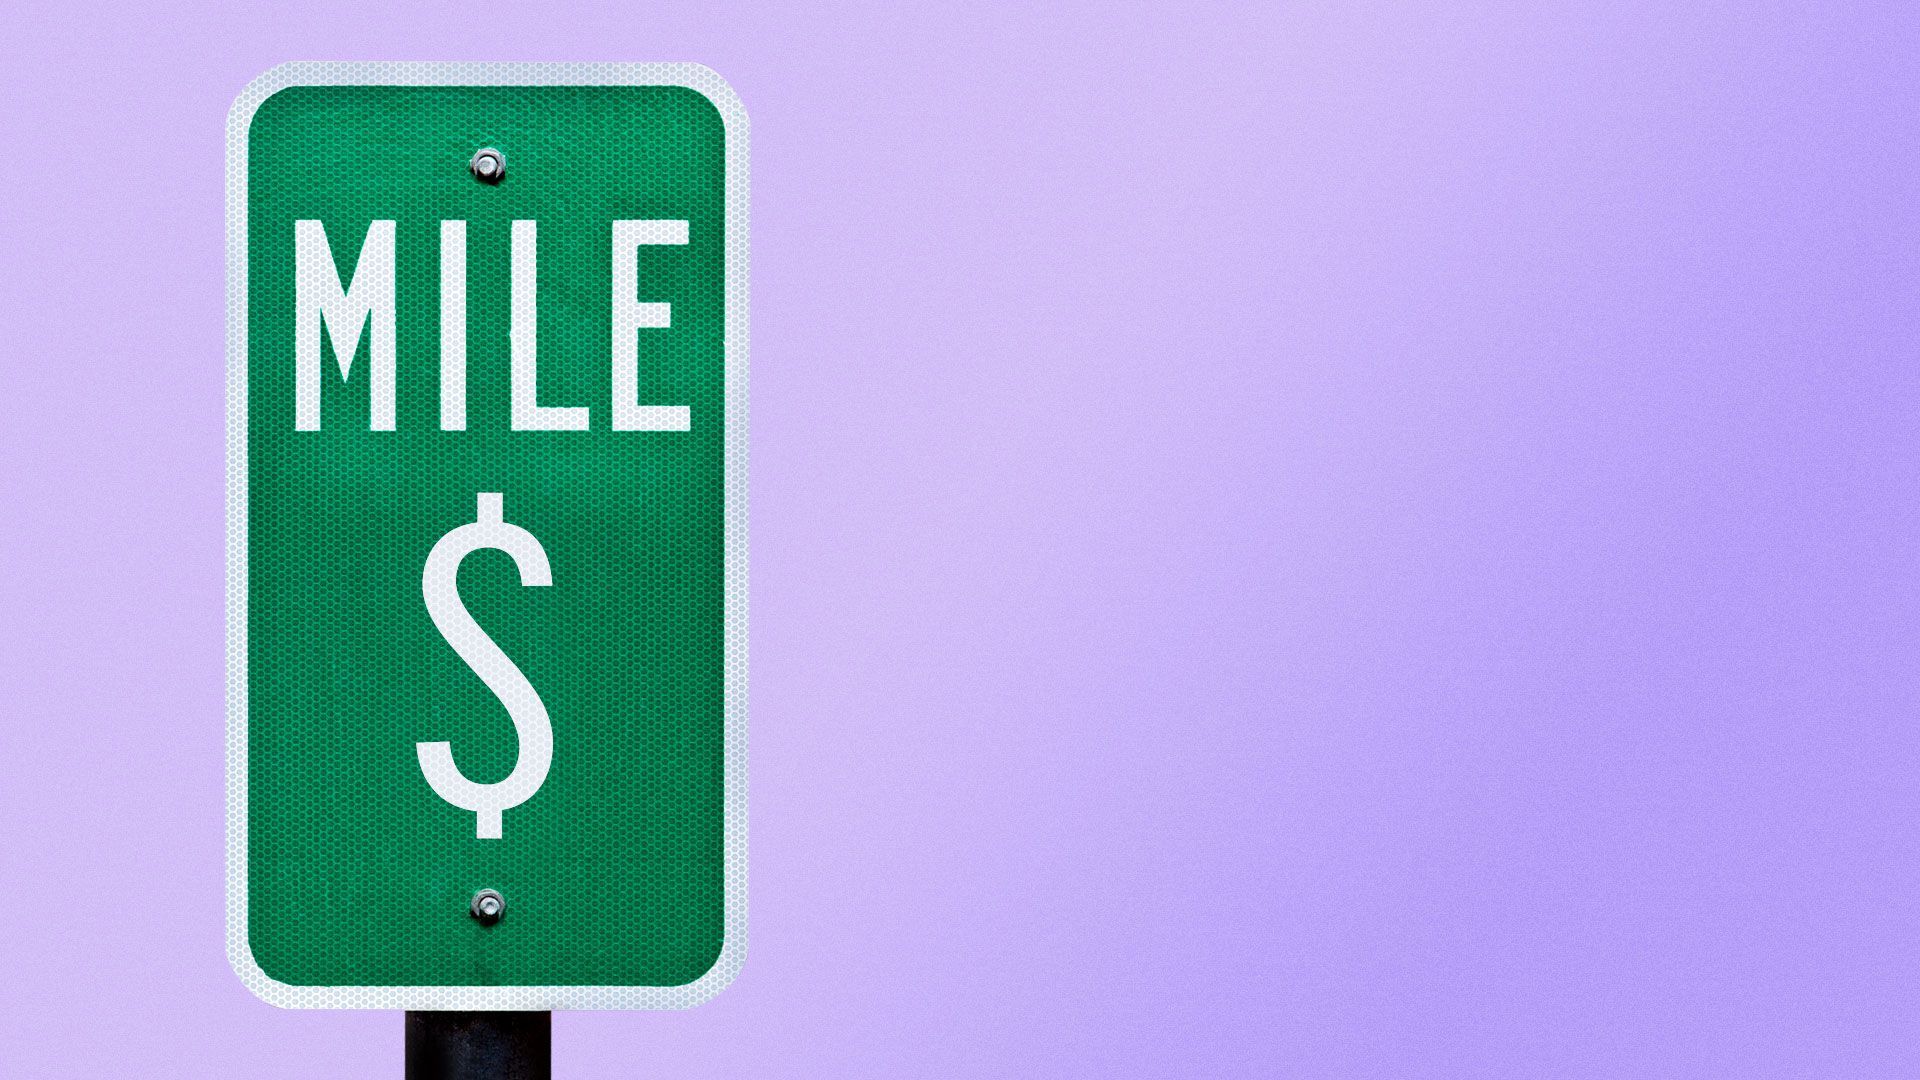 Illustration of a mile marker sign with a dollar sign